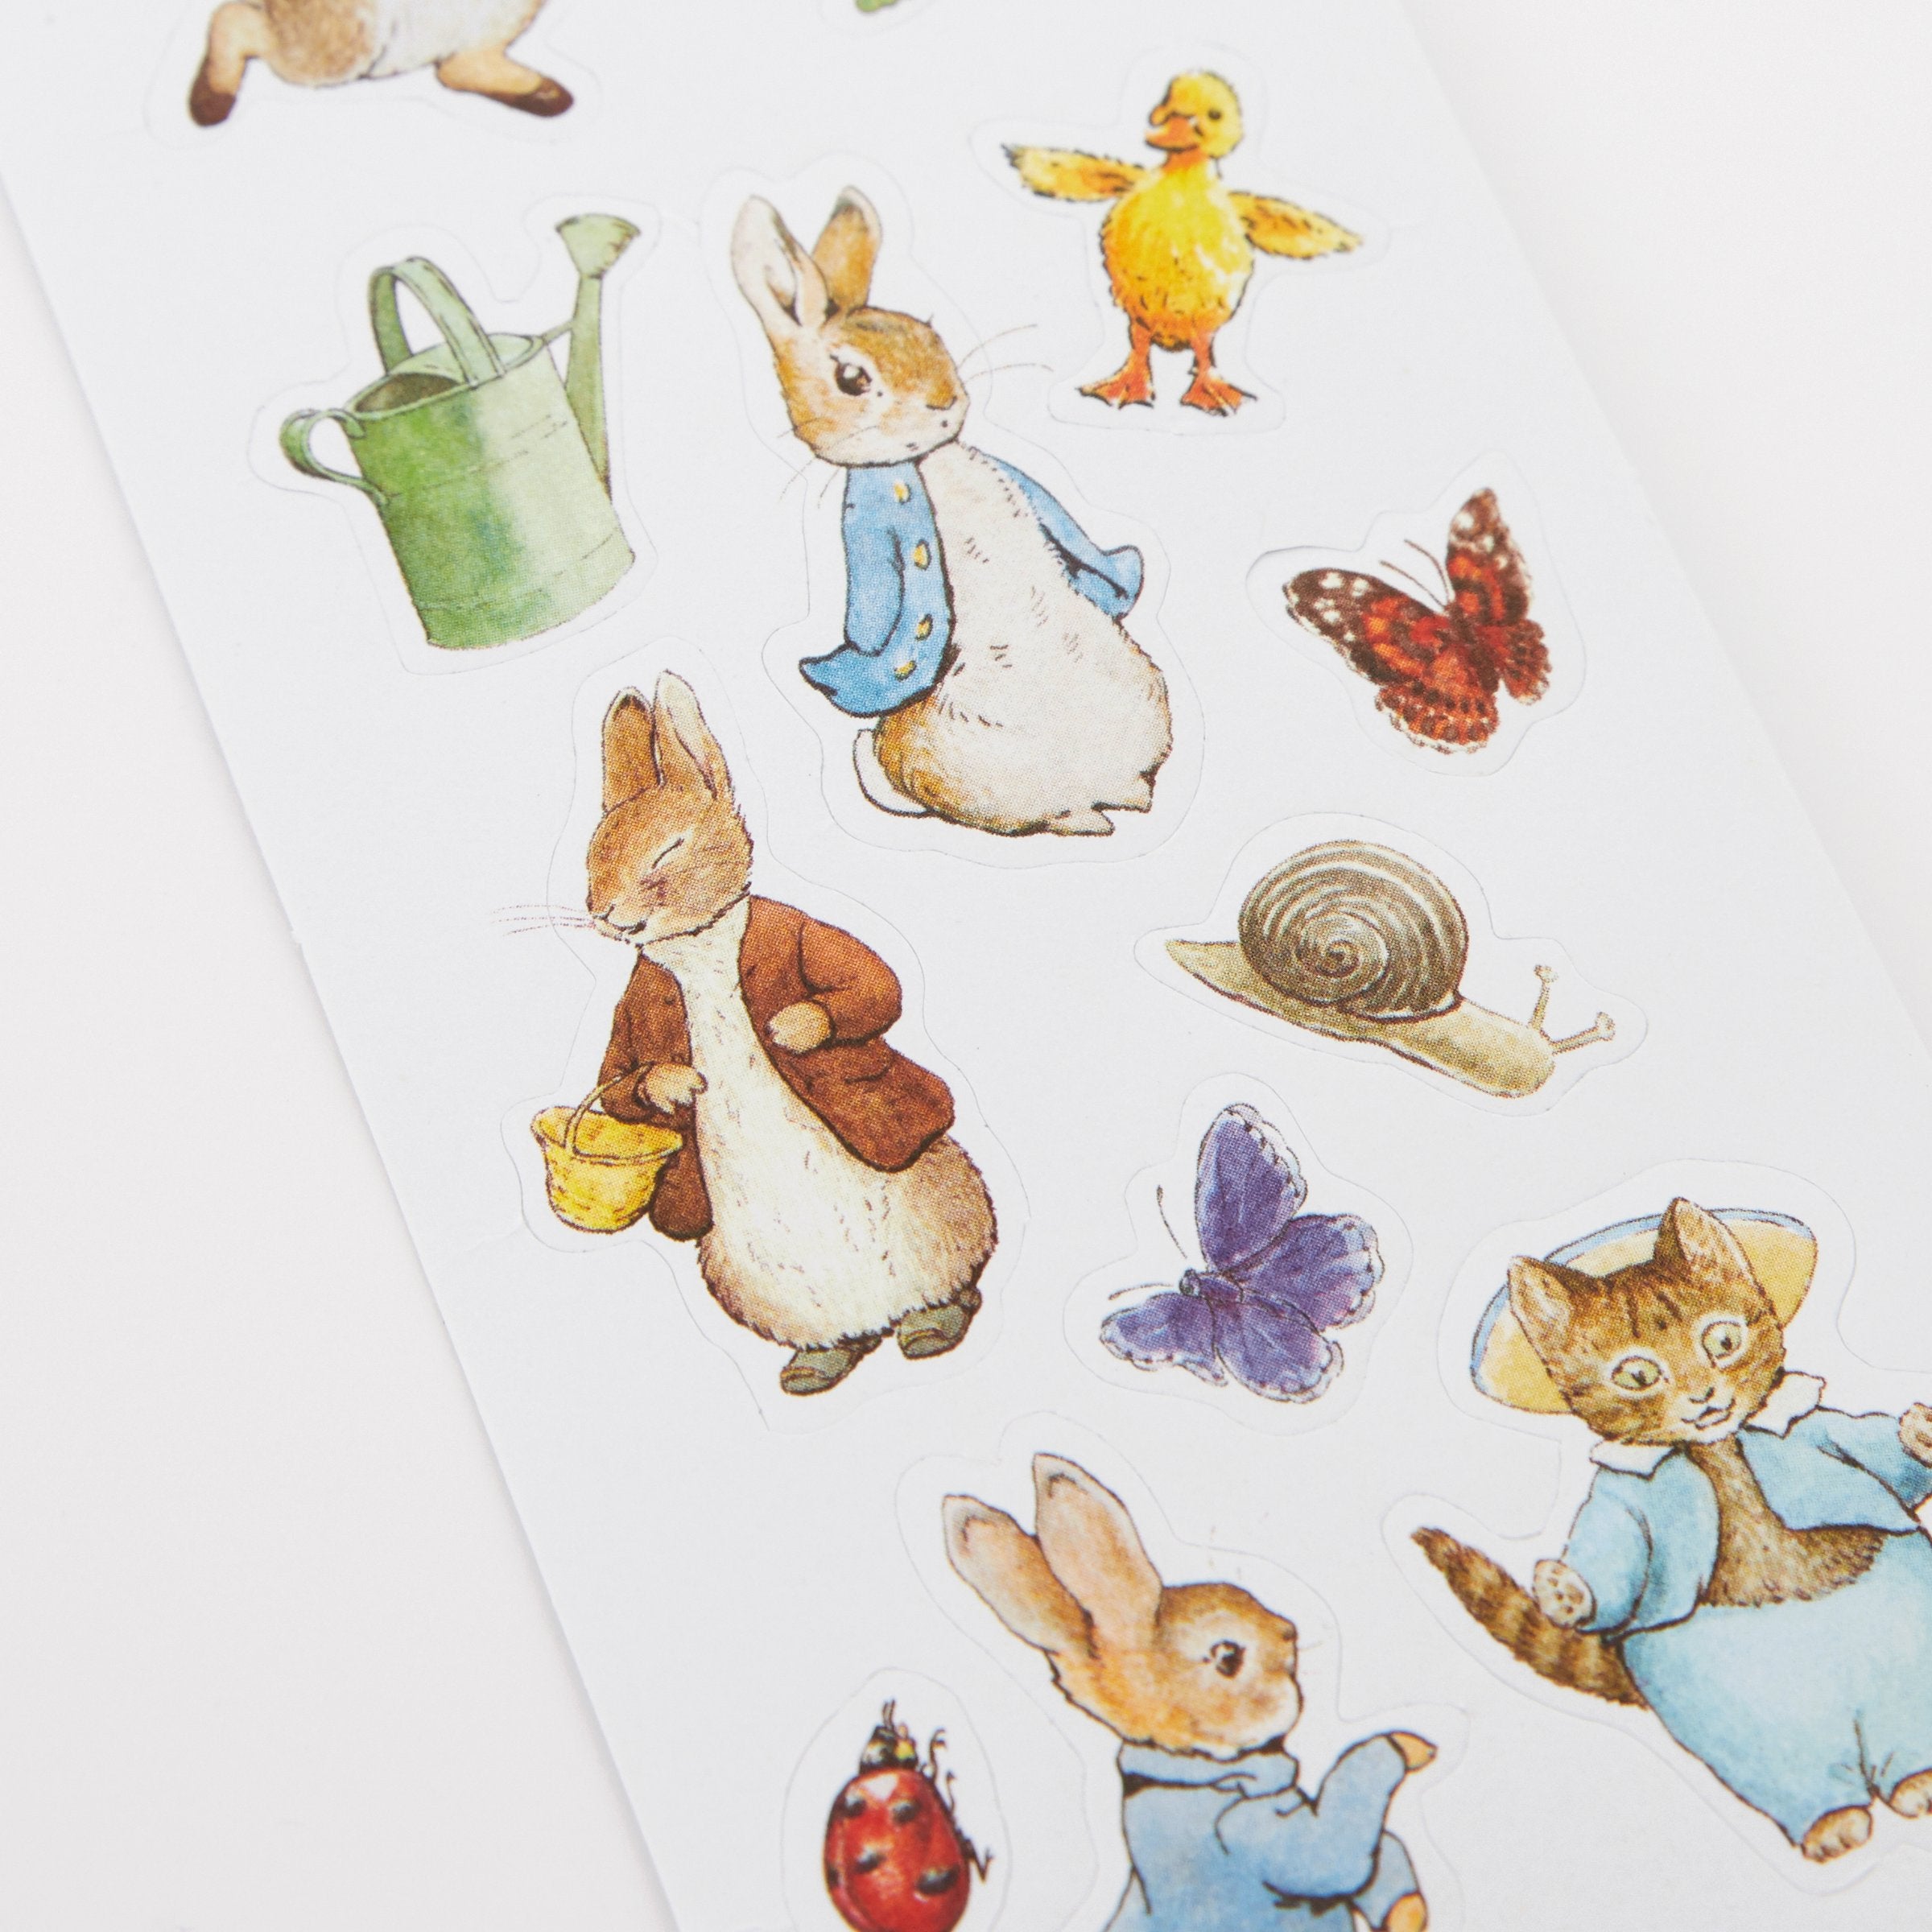 The 306 stickers come in an easy-to-use roll, with 17 delightful Peter Rabbit and friends designs.